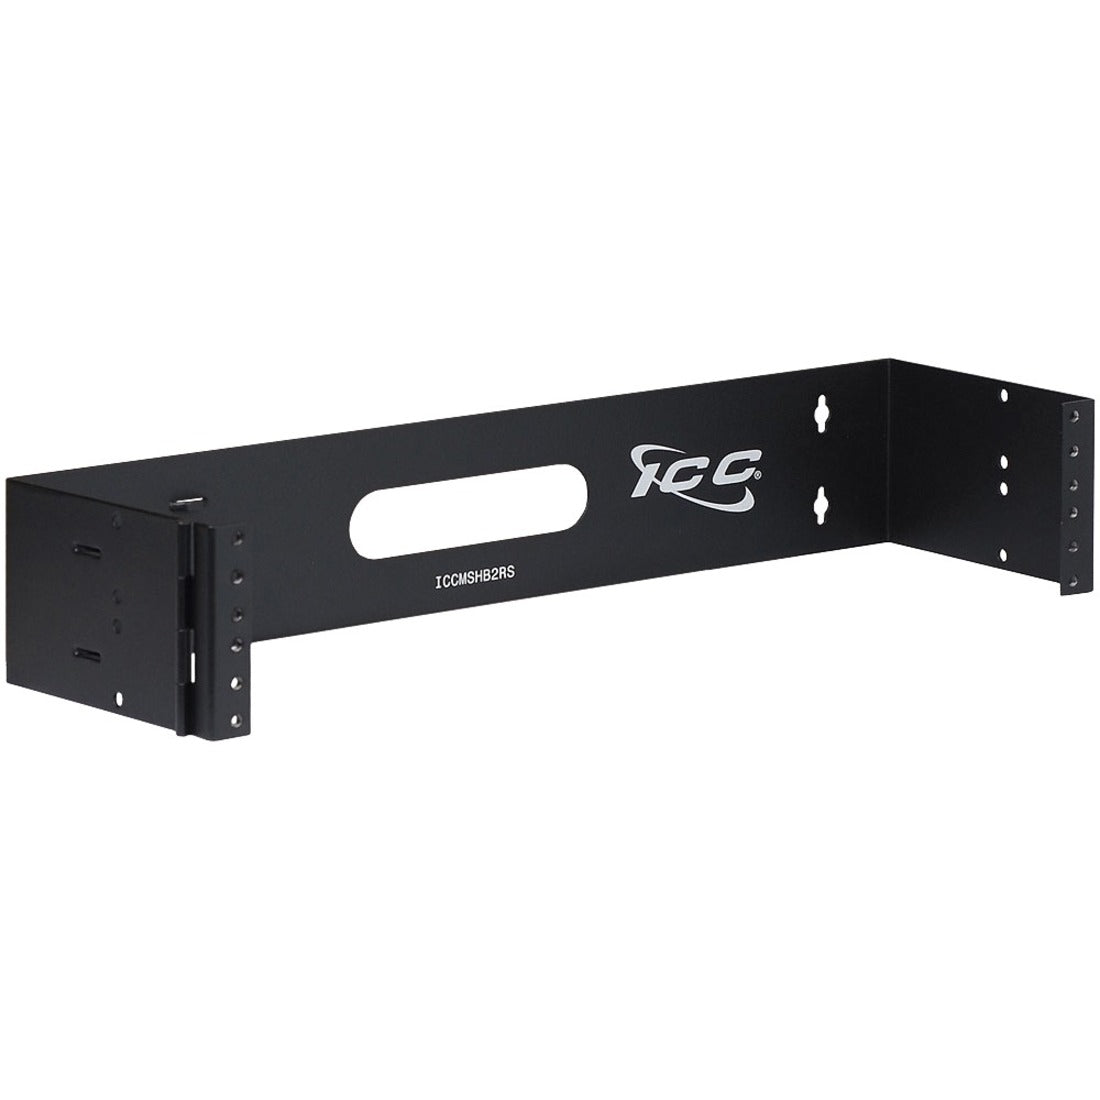 ICC ICCMSHB2RS Wall Mount Hinged Bracket for Rack - Black, Easy Access, Space-Saving Design